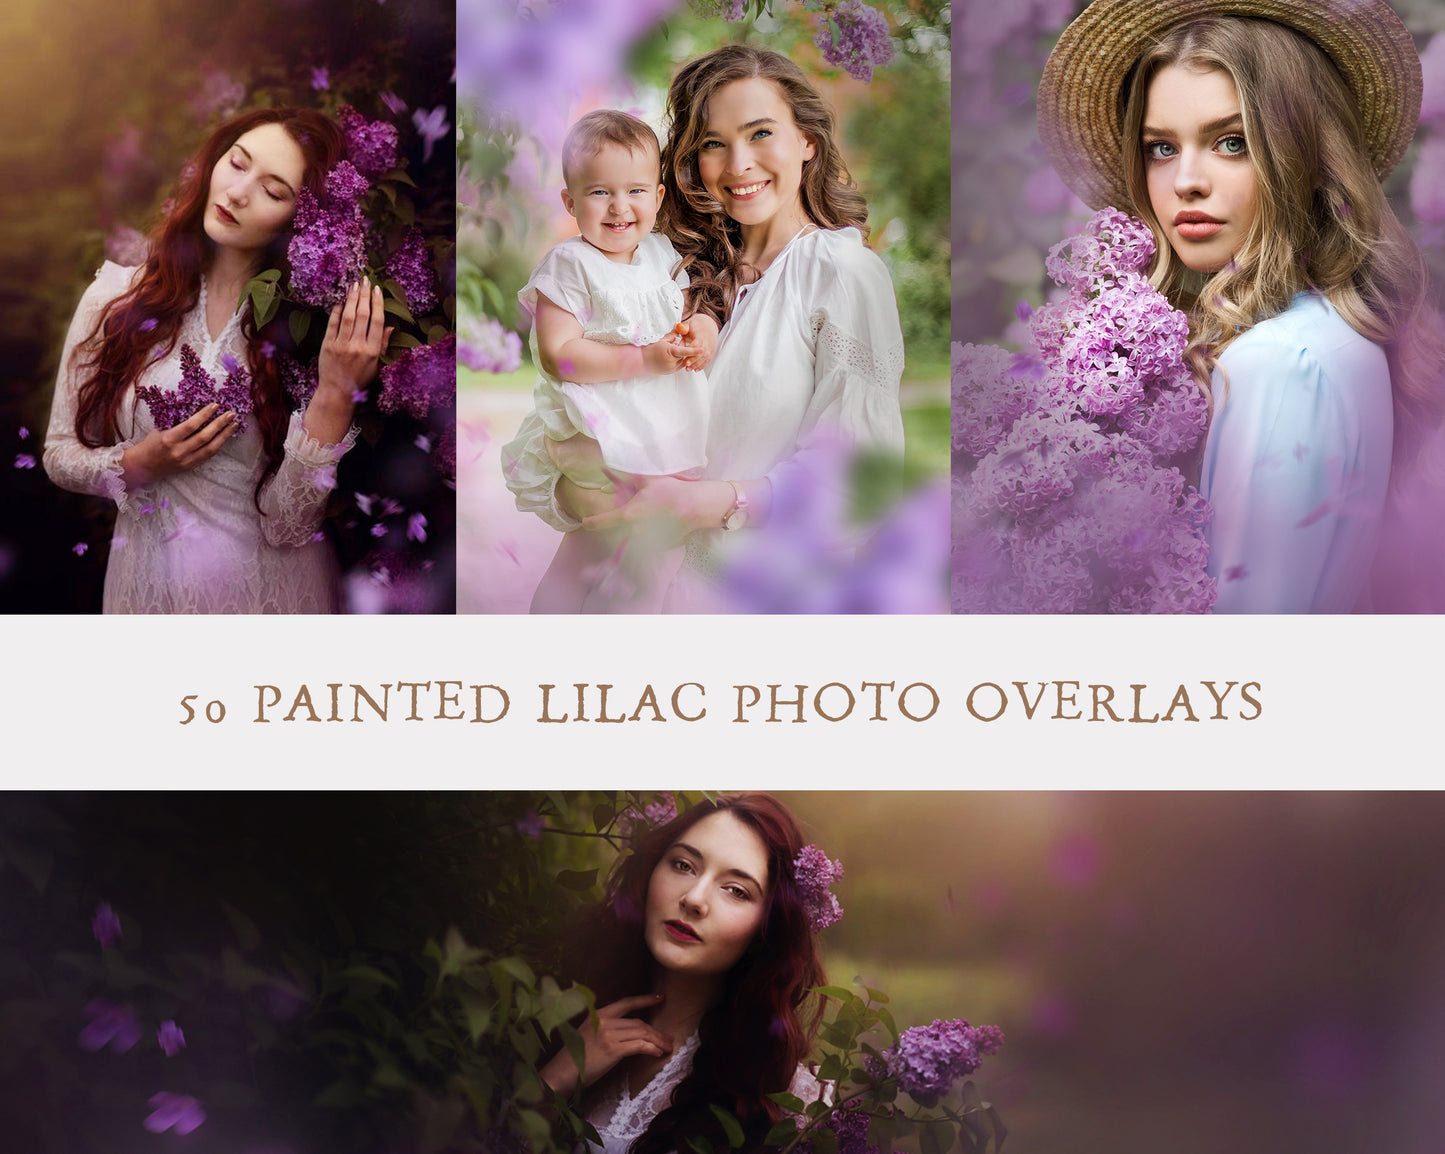 Painted Lilacs Photo Overlays